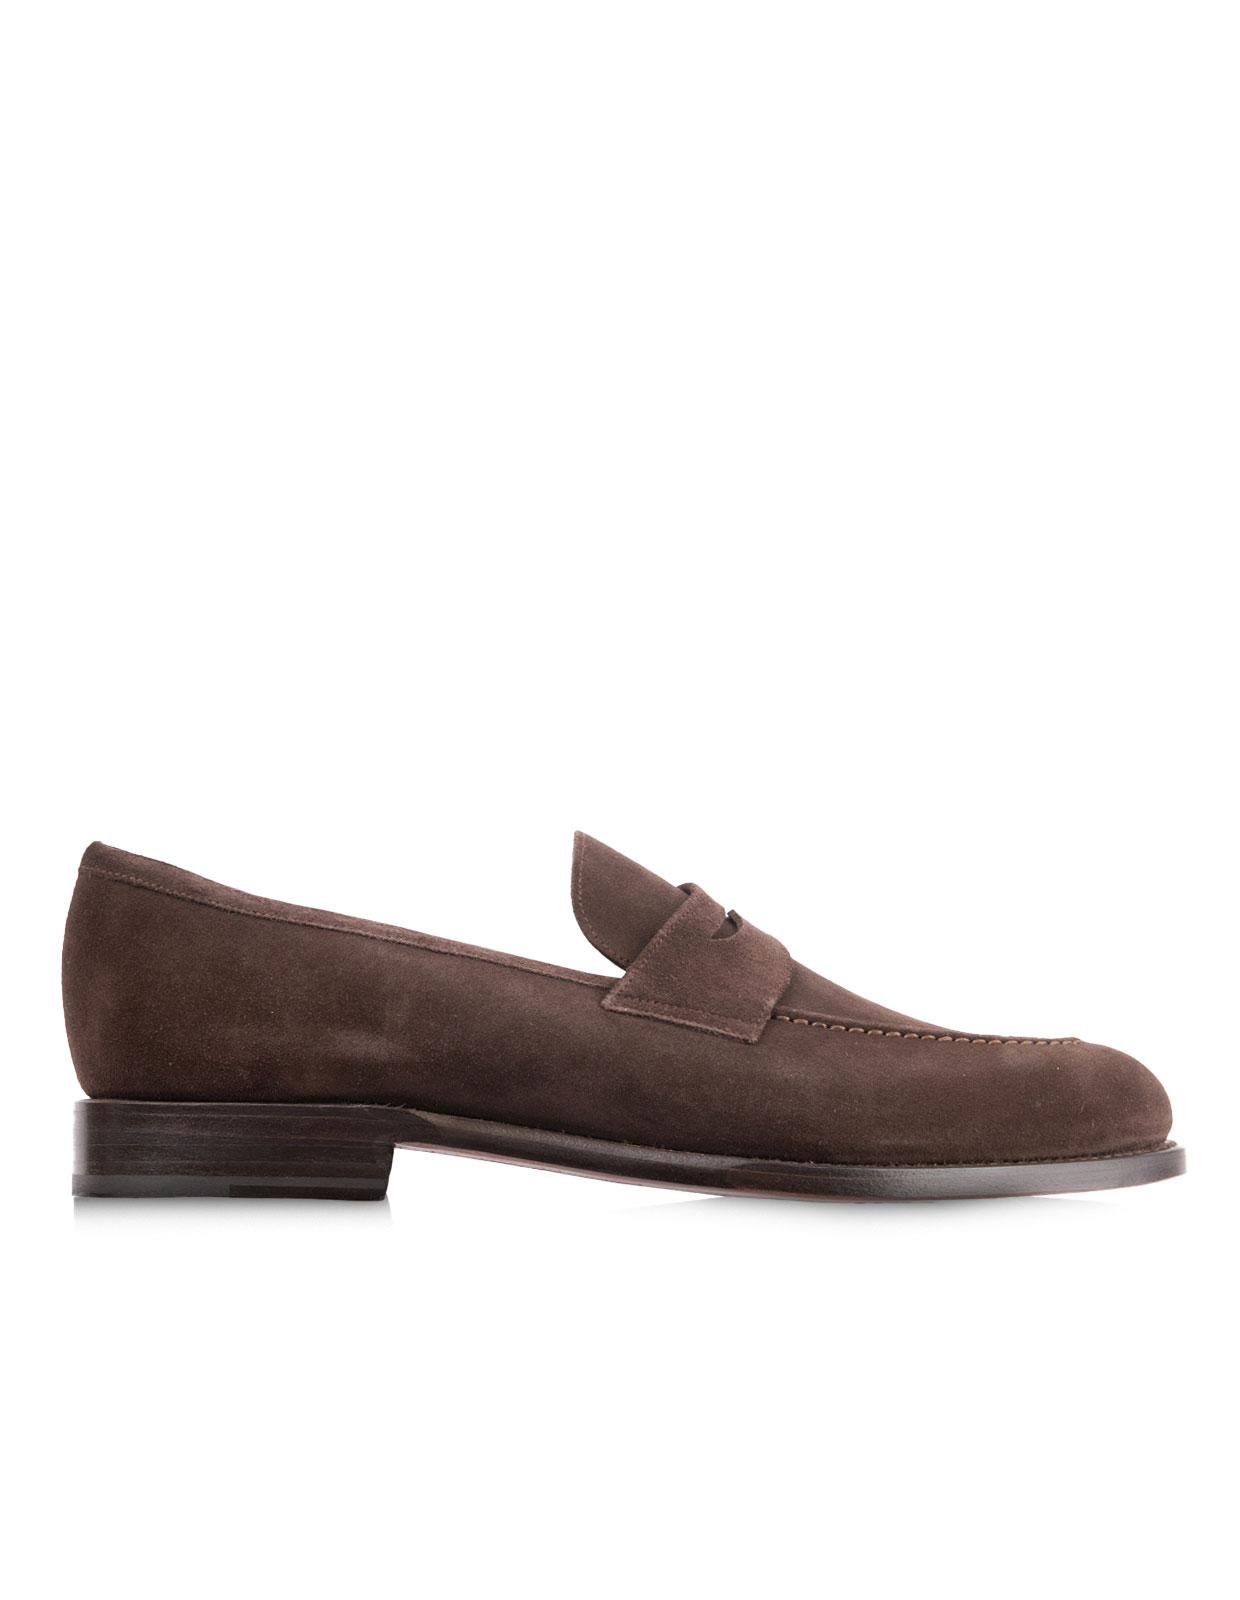 Penny Loafers Suede Bitter Chocolate Stl 12